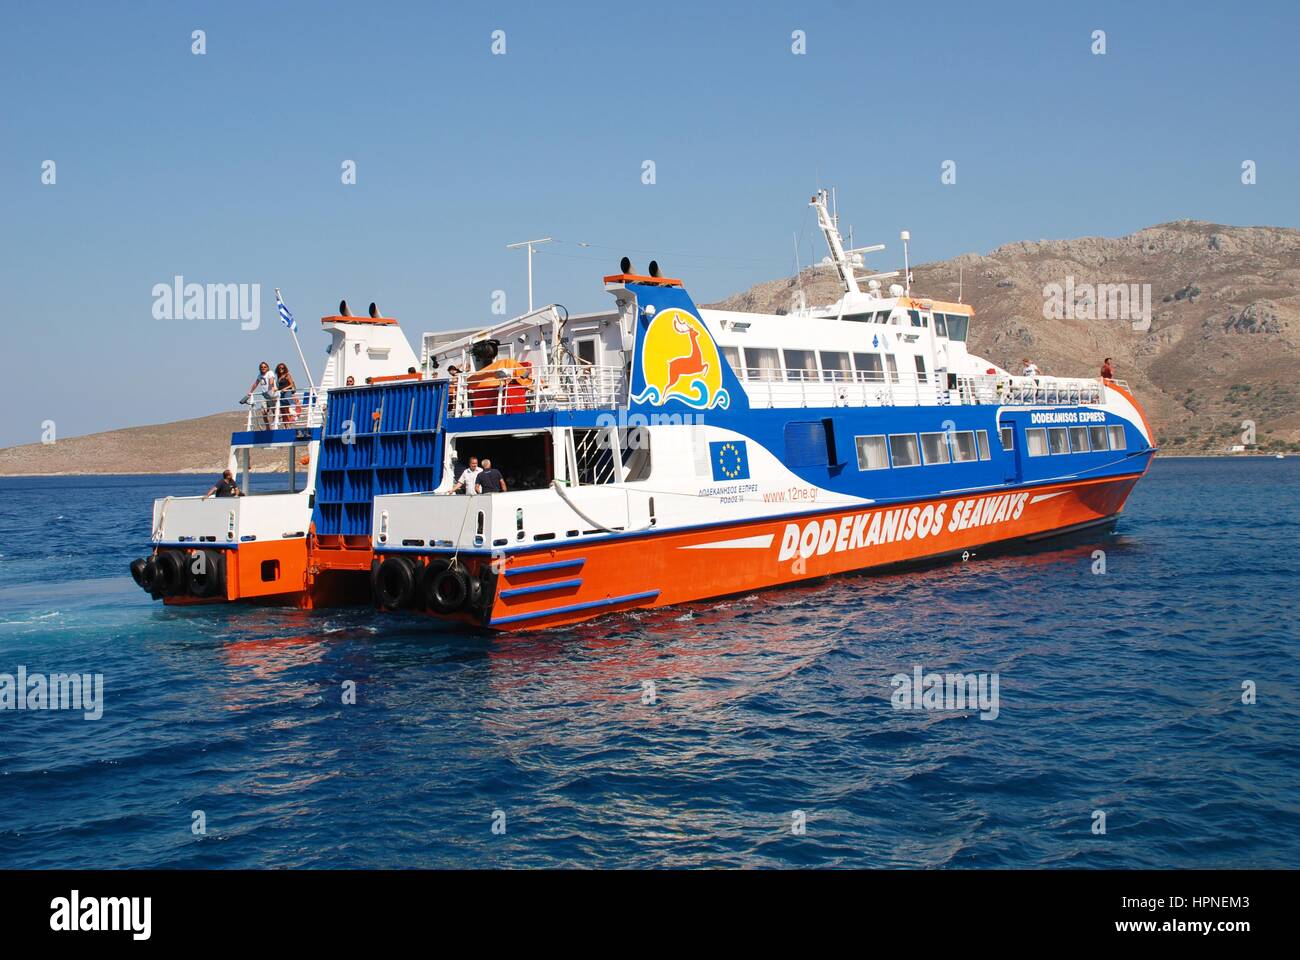 Dodekanisos Seaways catamaran ferry Dodekanisos Express arriving at the Greek island of Tilos on July 19, 2016. The vessel was built in 2000 in Norway Stock Photo